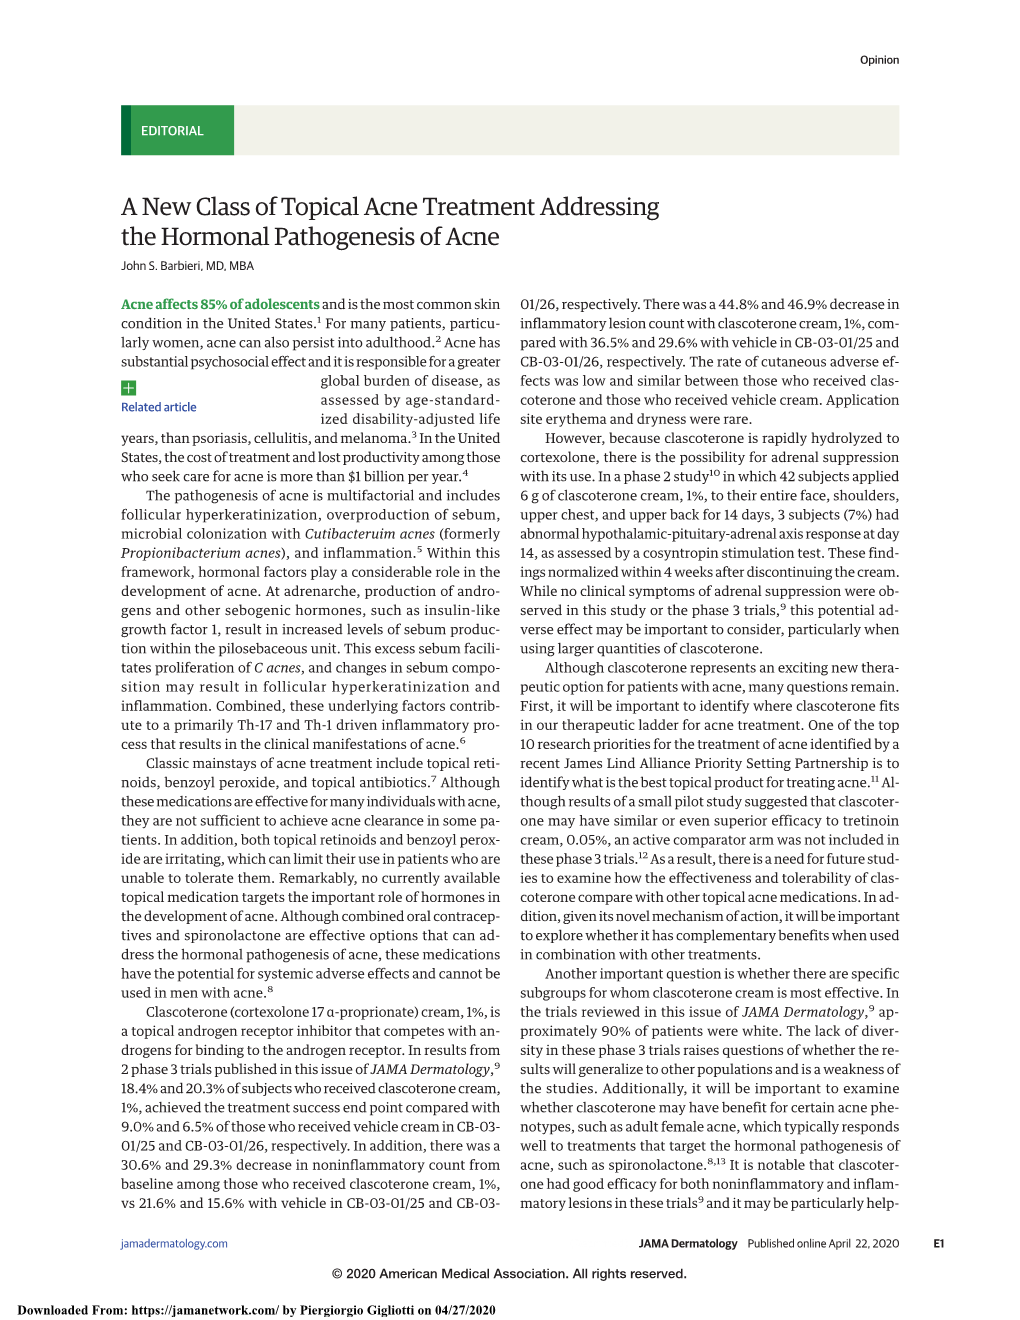 A New Class of Topical Acne Treatment Addressing the Hormonal Pathogenesis of Acne John S